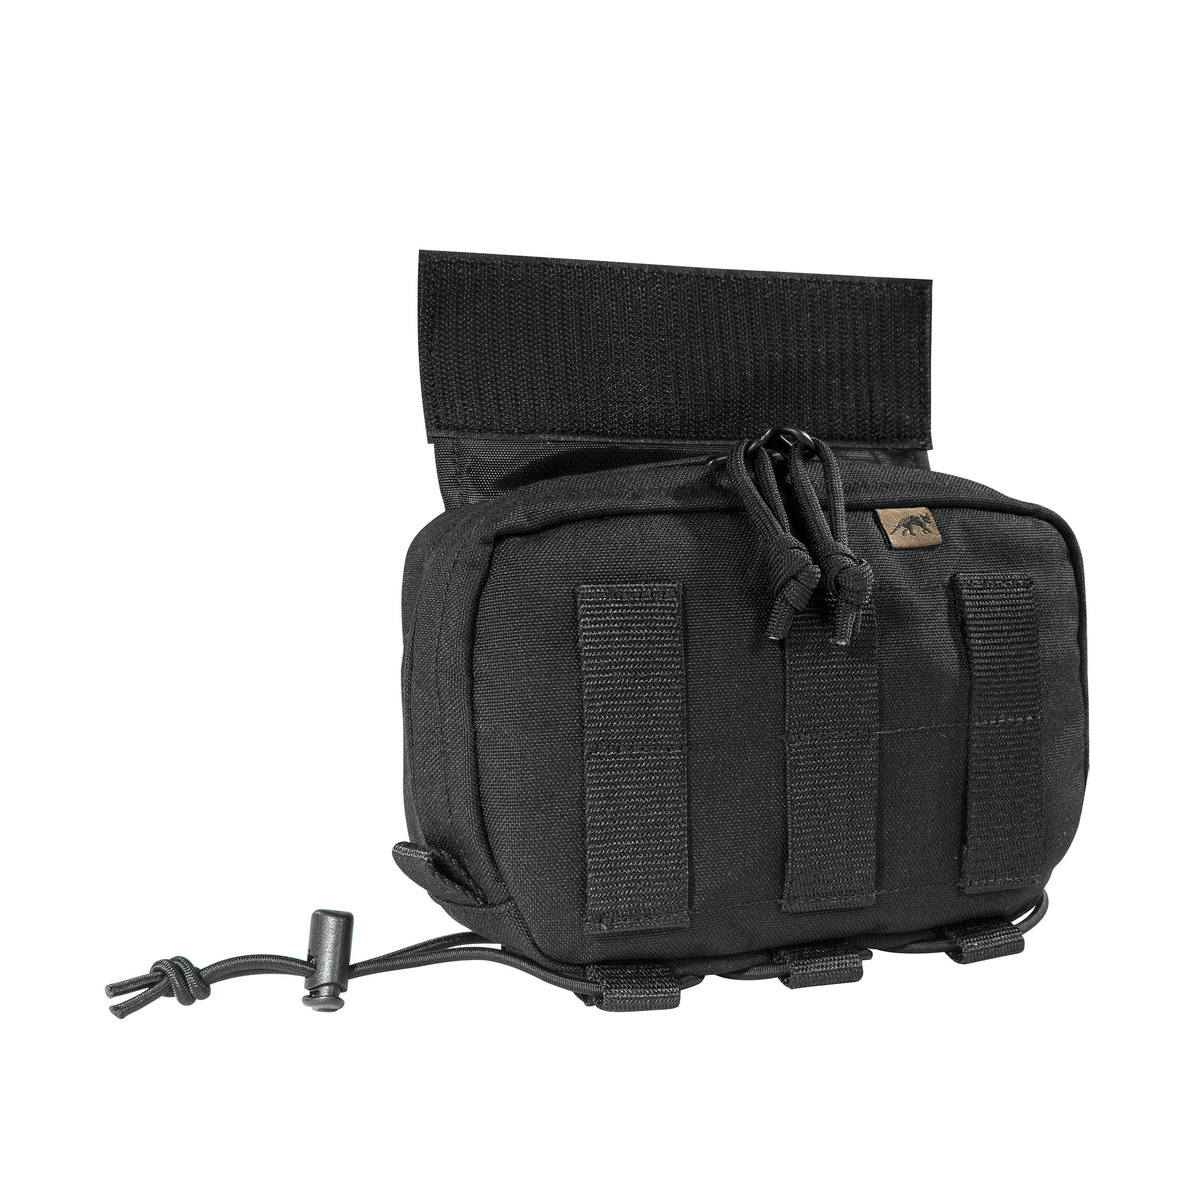 Tac Pouch 12 Black, One Size